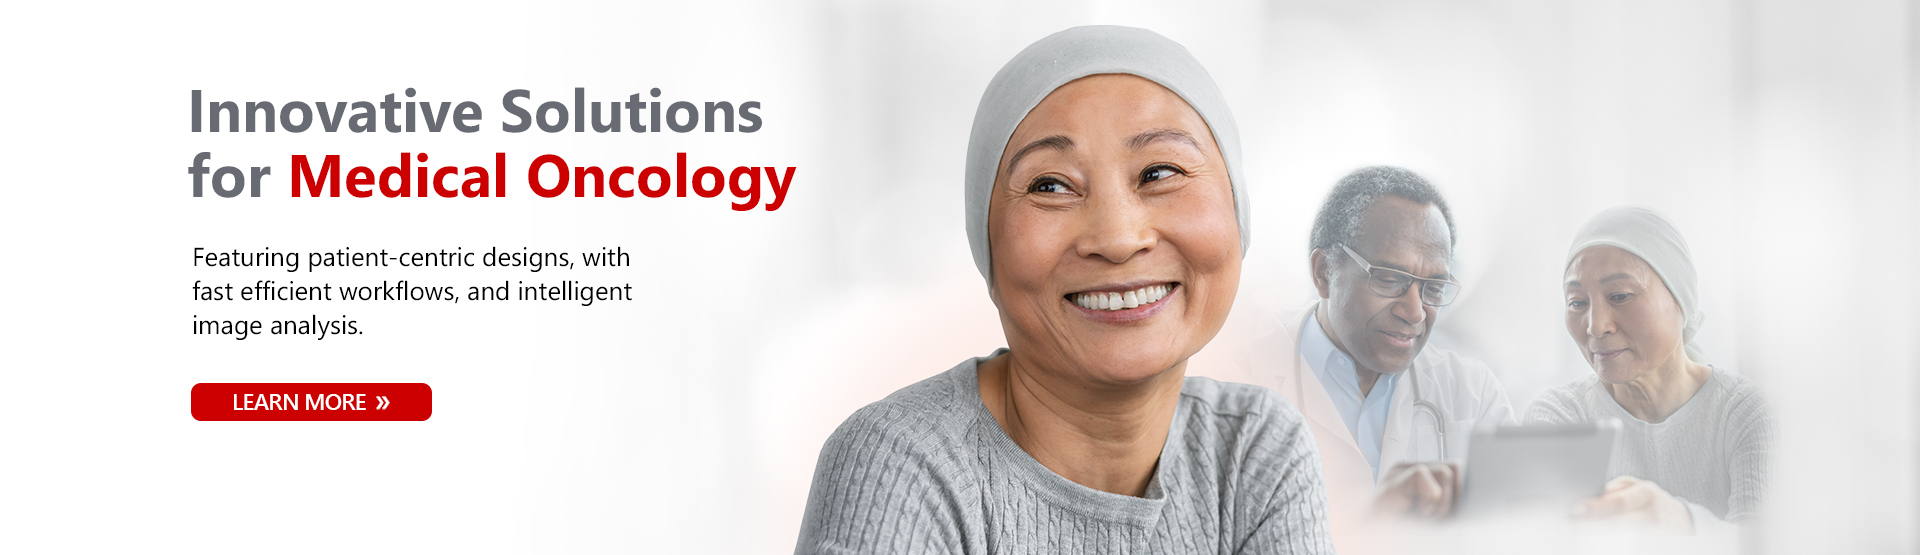 Innovative Solutions for Medical Oncology | Featuring patient-centric designs, with fast efficient workflows, and intelligent image analysis. | Learn More